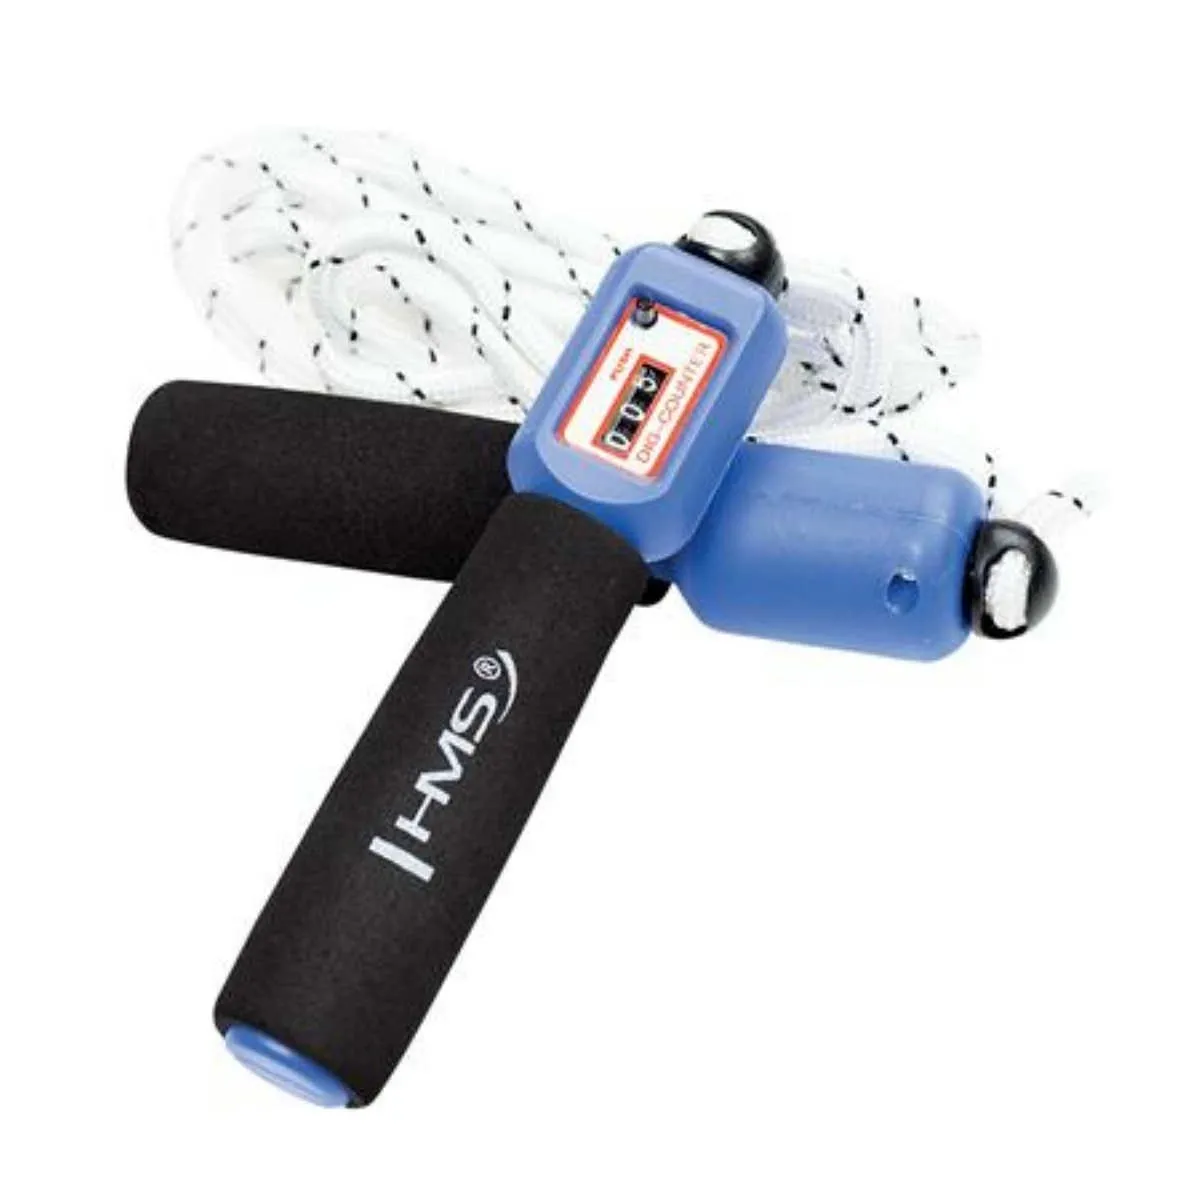 Skipping rope with mechanical counter